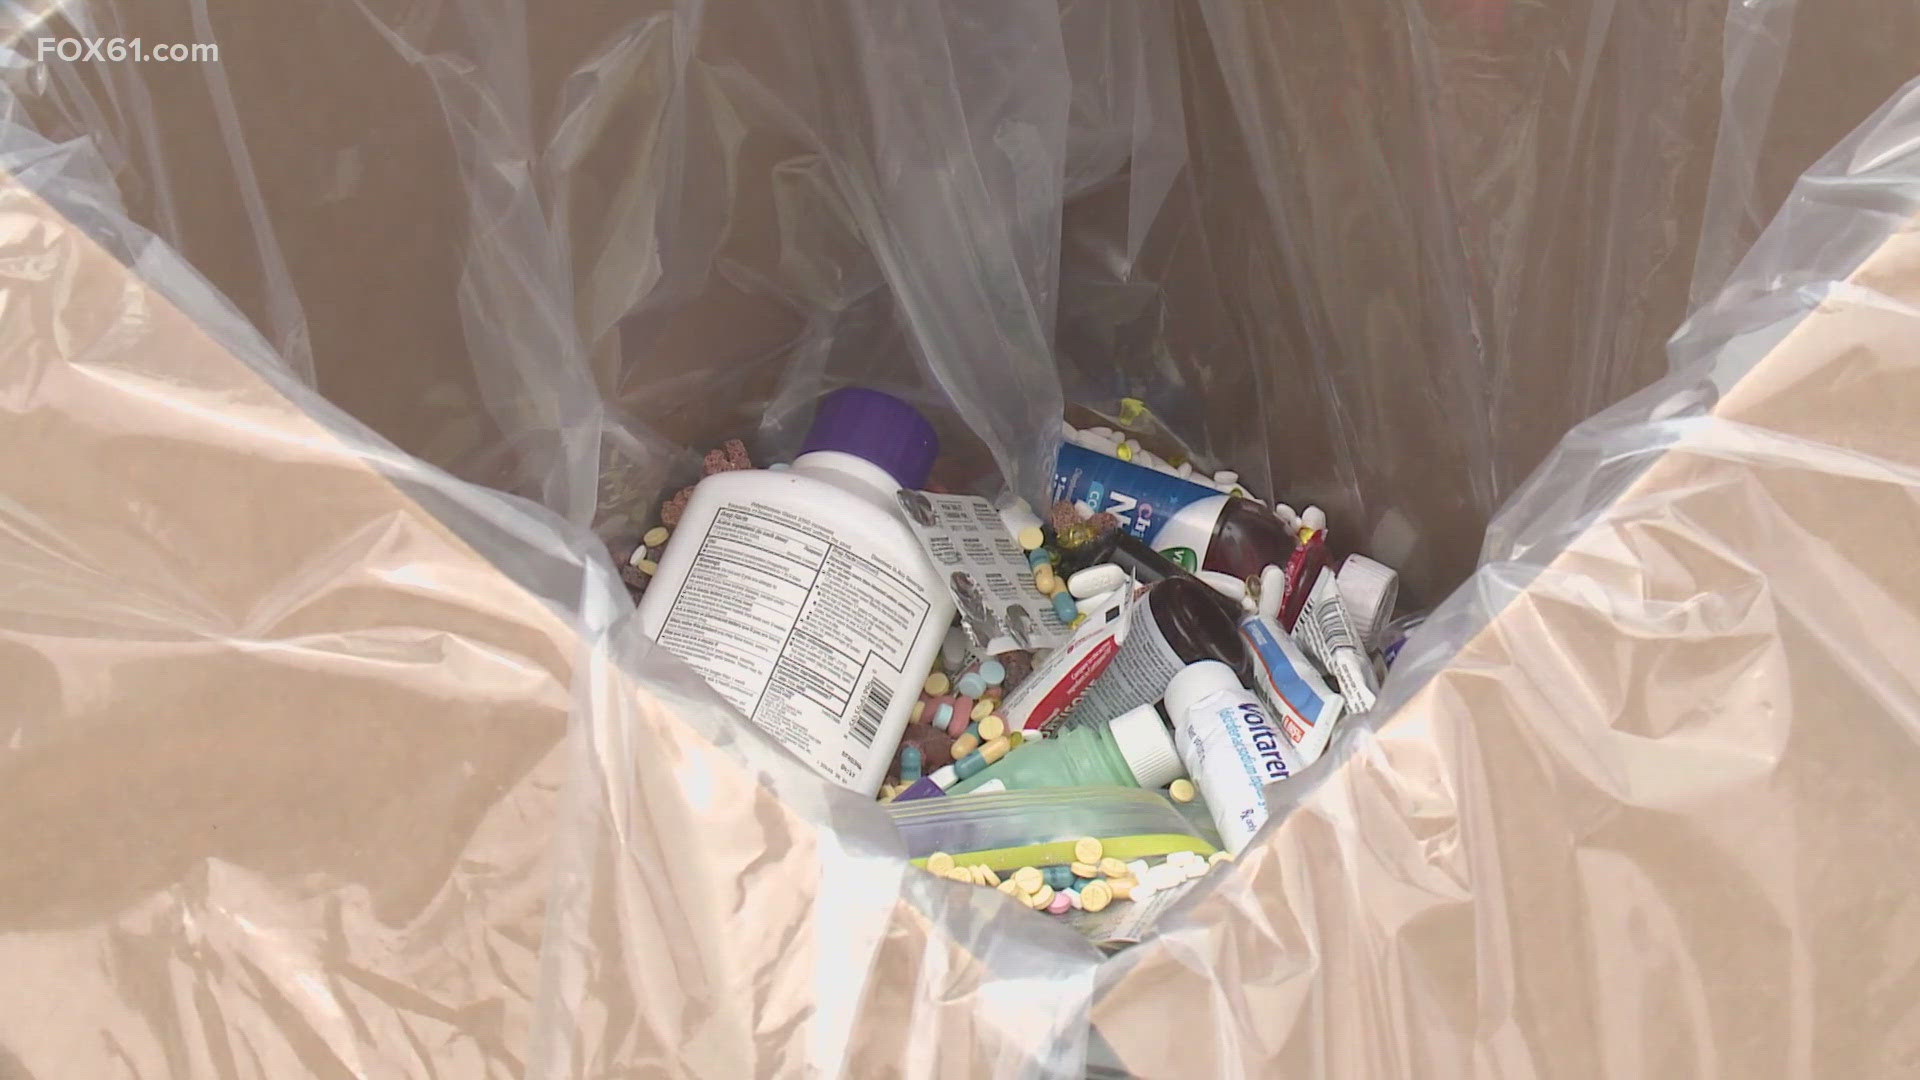 State and local officials gathered on Friday in East Hartford to highlight the importance of properly disposing of expired and unwanted prescription medications.